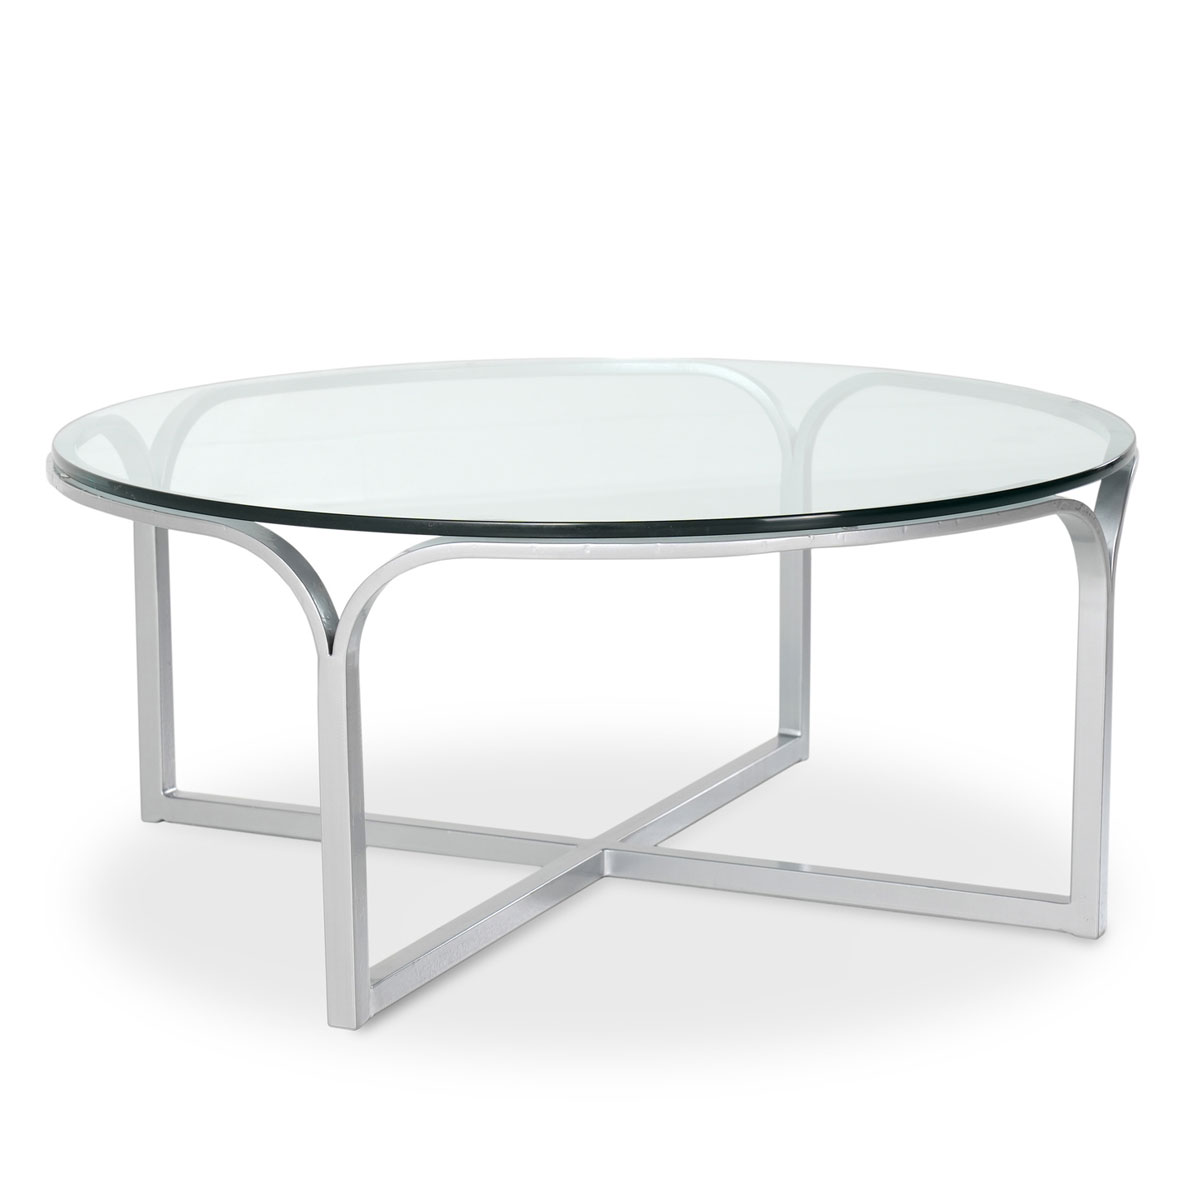 Charleston Forge Wave 54 inch Round Cocktail Table 